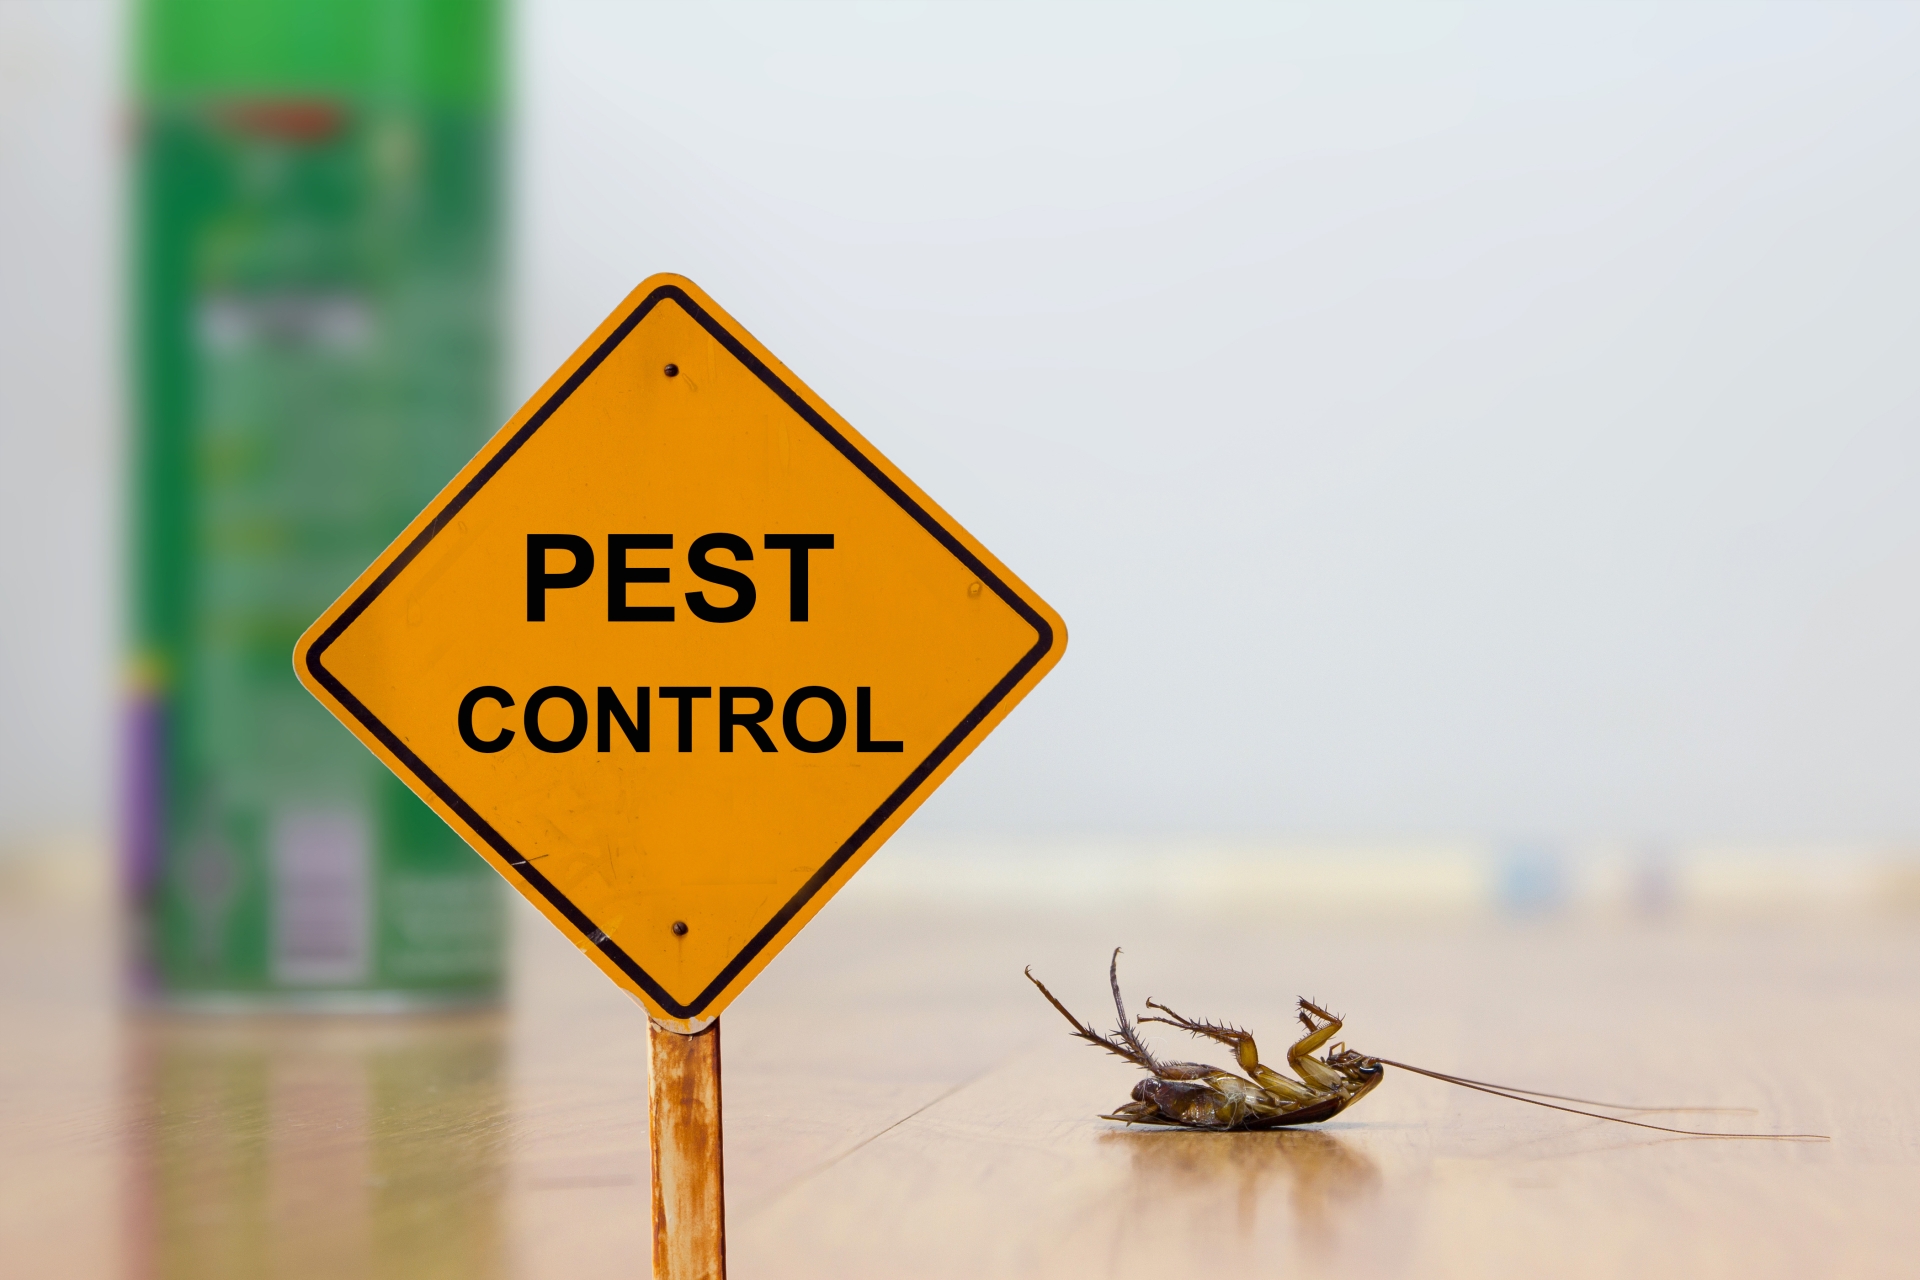 24 Hour Pest Control, Pest Control in Walworth, SE17. Call Now 020 8166 9746